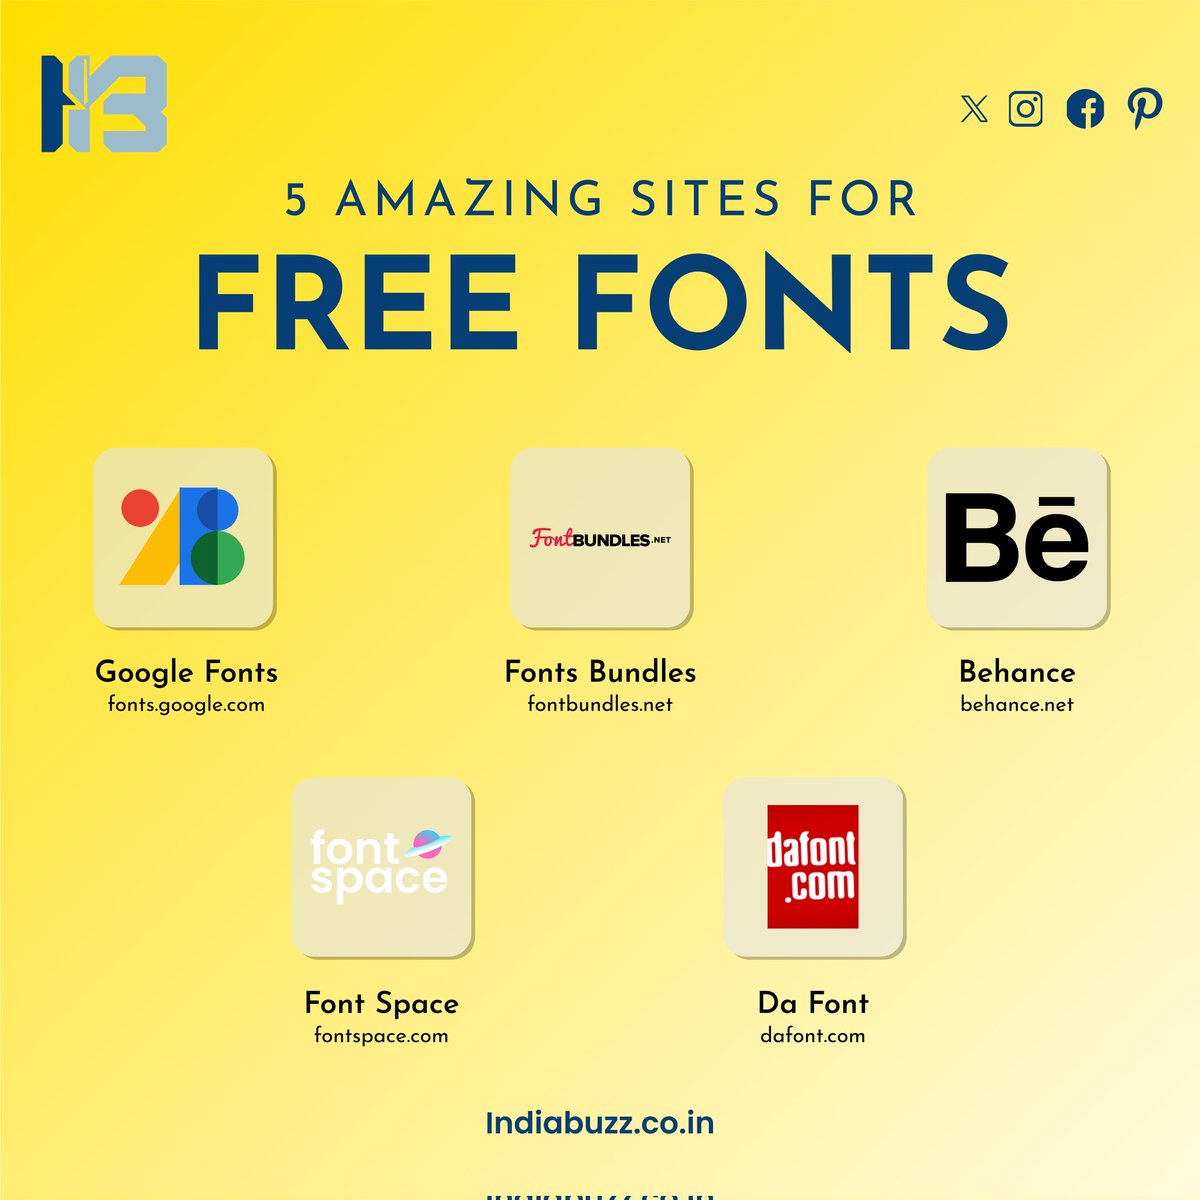 Fonts that won't cost you a dime! Check out these 5 amazing sites to find the perfect free fonts for your next design project. 🖌️✨ #FreeFonts #DesignInspiration #CreativeResources #ibuzztechsolution